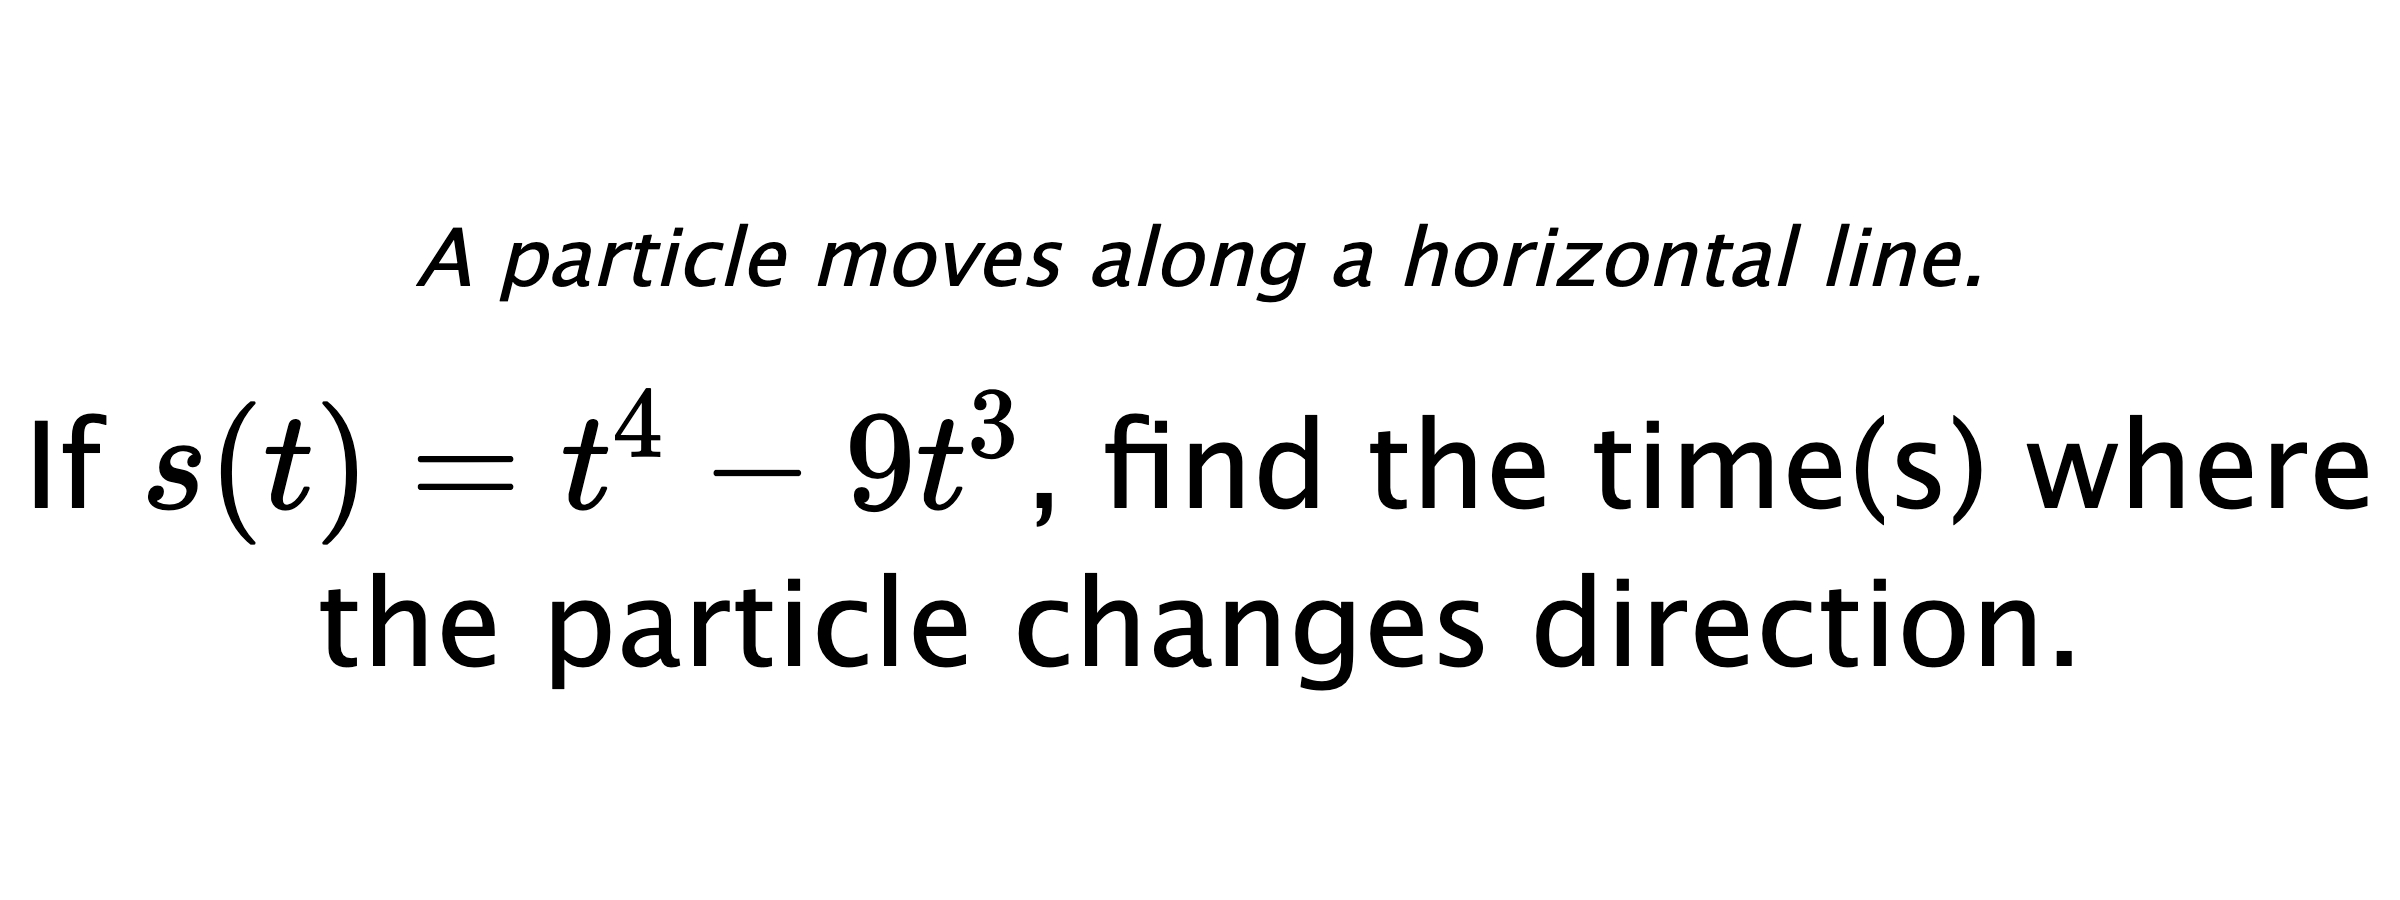 A particle moves along a horizontal line. If $ s(t)=t^4-9t^3 $, find the time(s) where the particle changes direction.